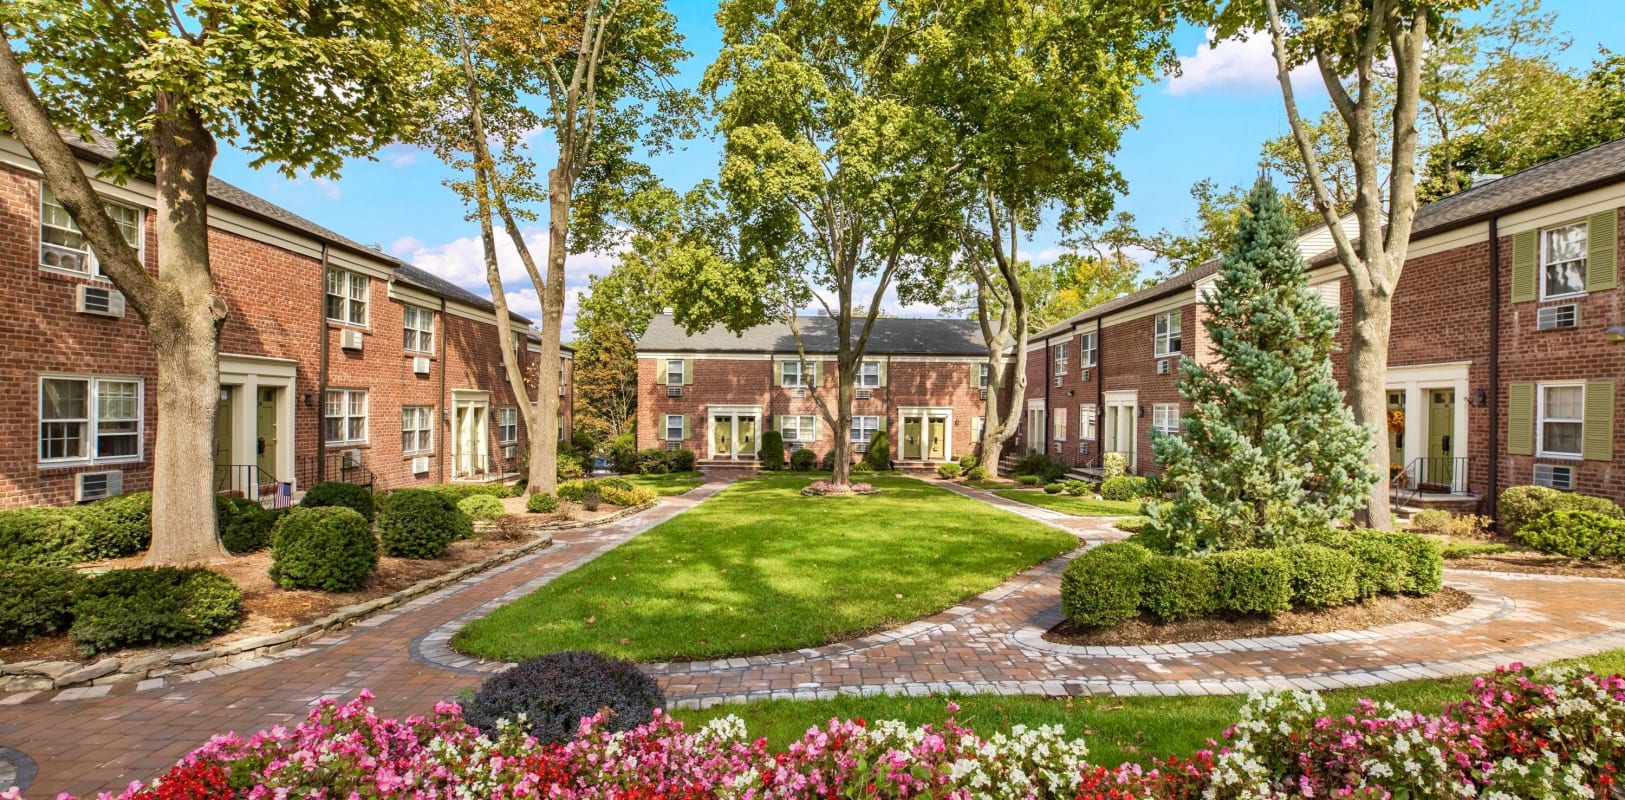 Beautiful brick exterior surround by a lush manicure landscape at General Wayne Townhomes and Ridgedale Gardens in Madison, New Jersey